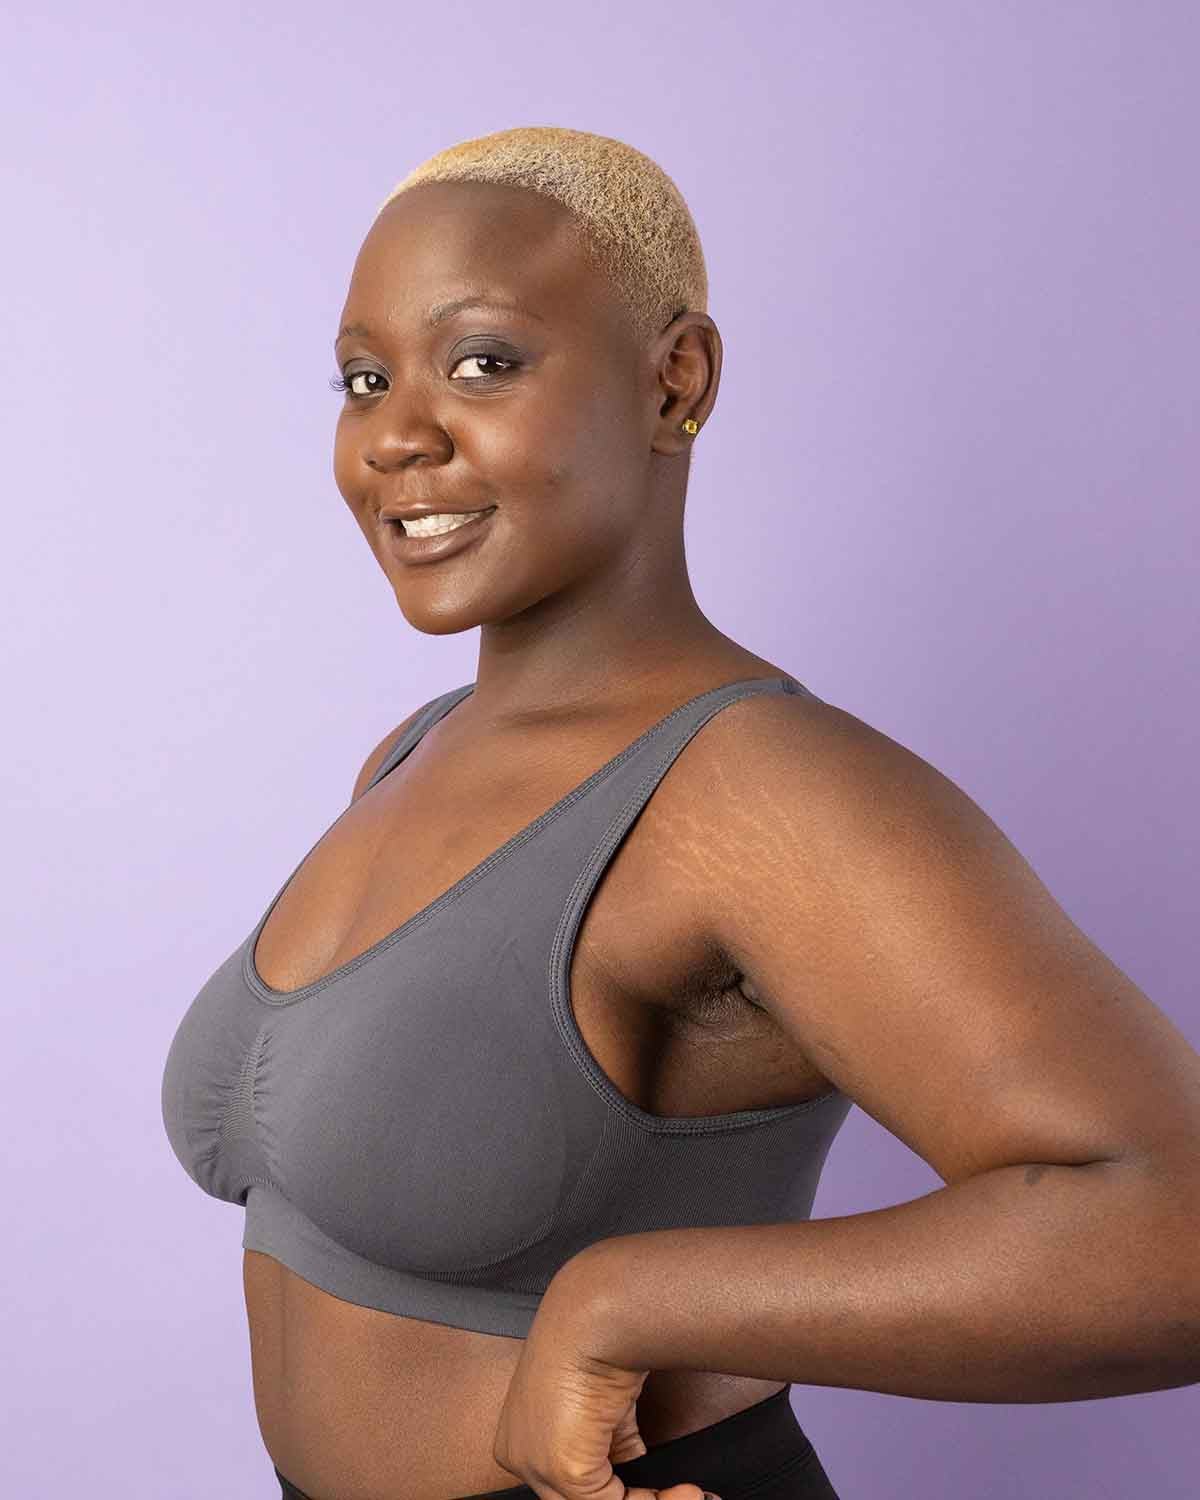 Comfort Bra Sport - Forests, Tides, and Treasures